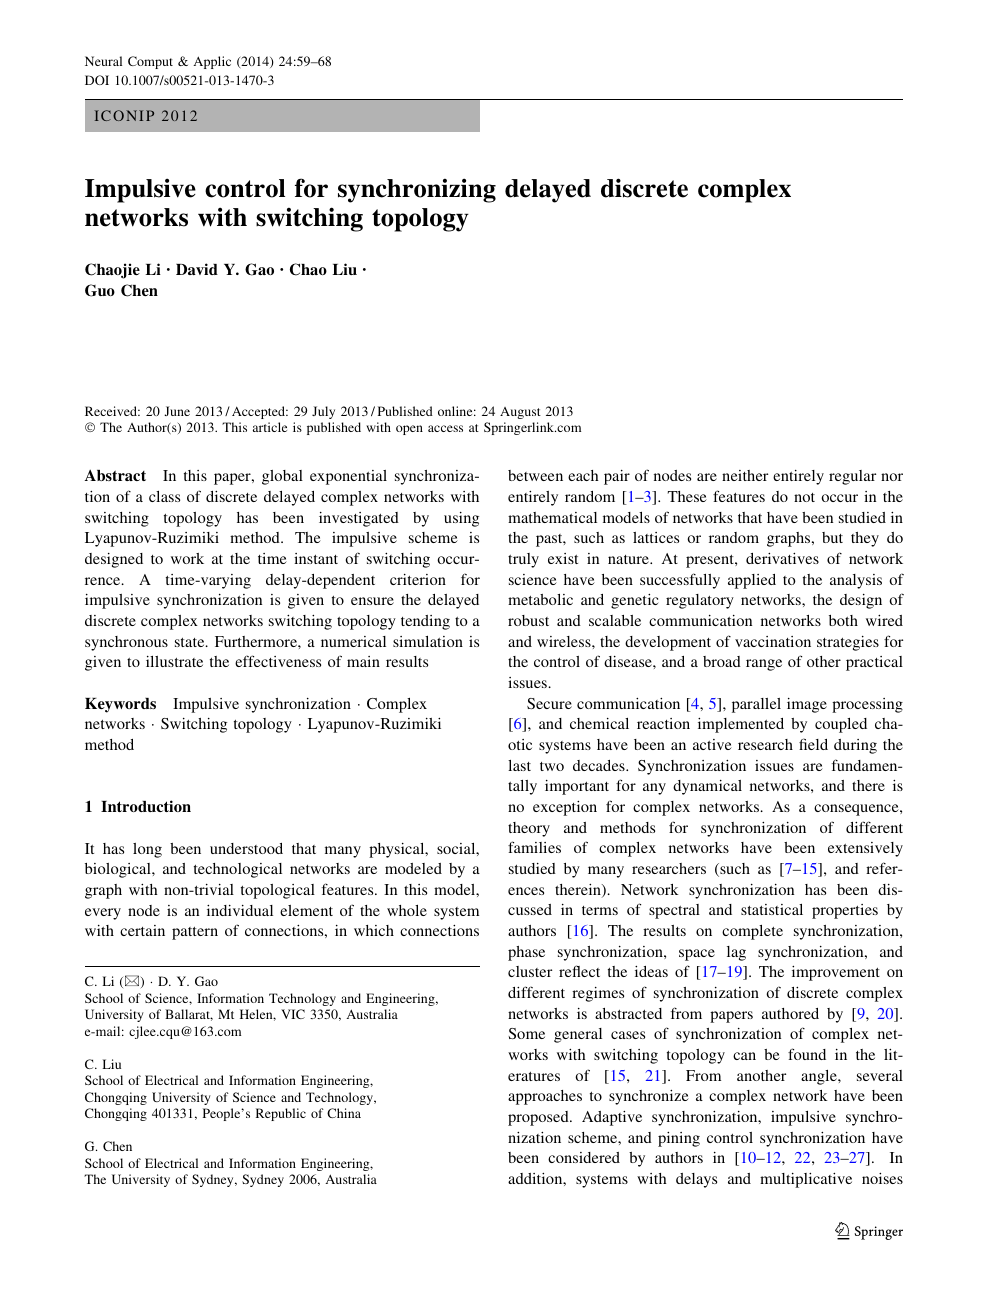 Impulsive Control For Synchronizing Delayed Discrete Complex Networks With Switching Topology Topic Of Research Paper In Mathematics Download Scholarly Article Pdf And Read For Free On Cyberleninka Open Science Hub